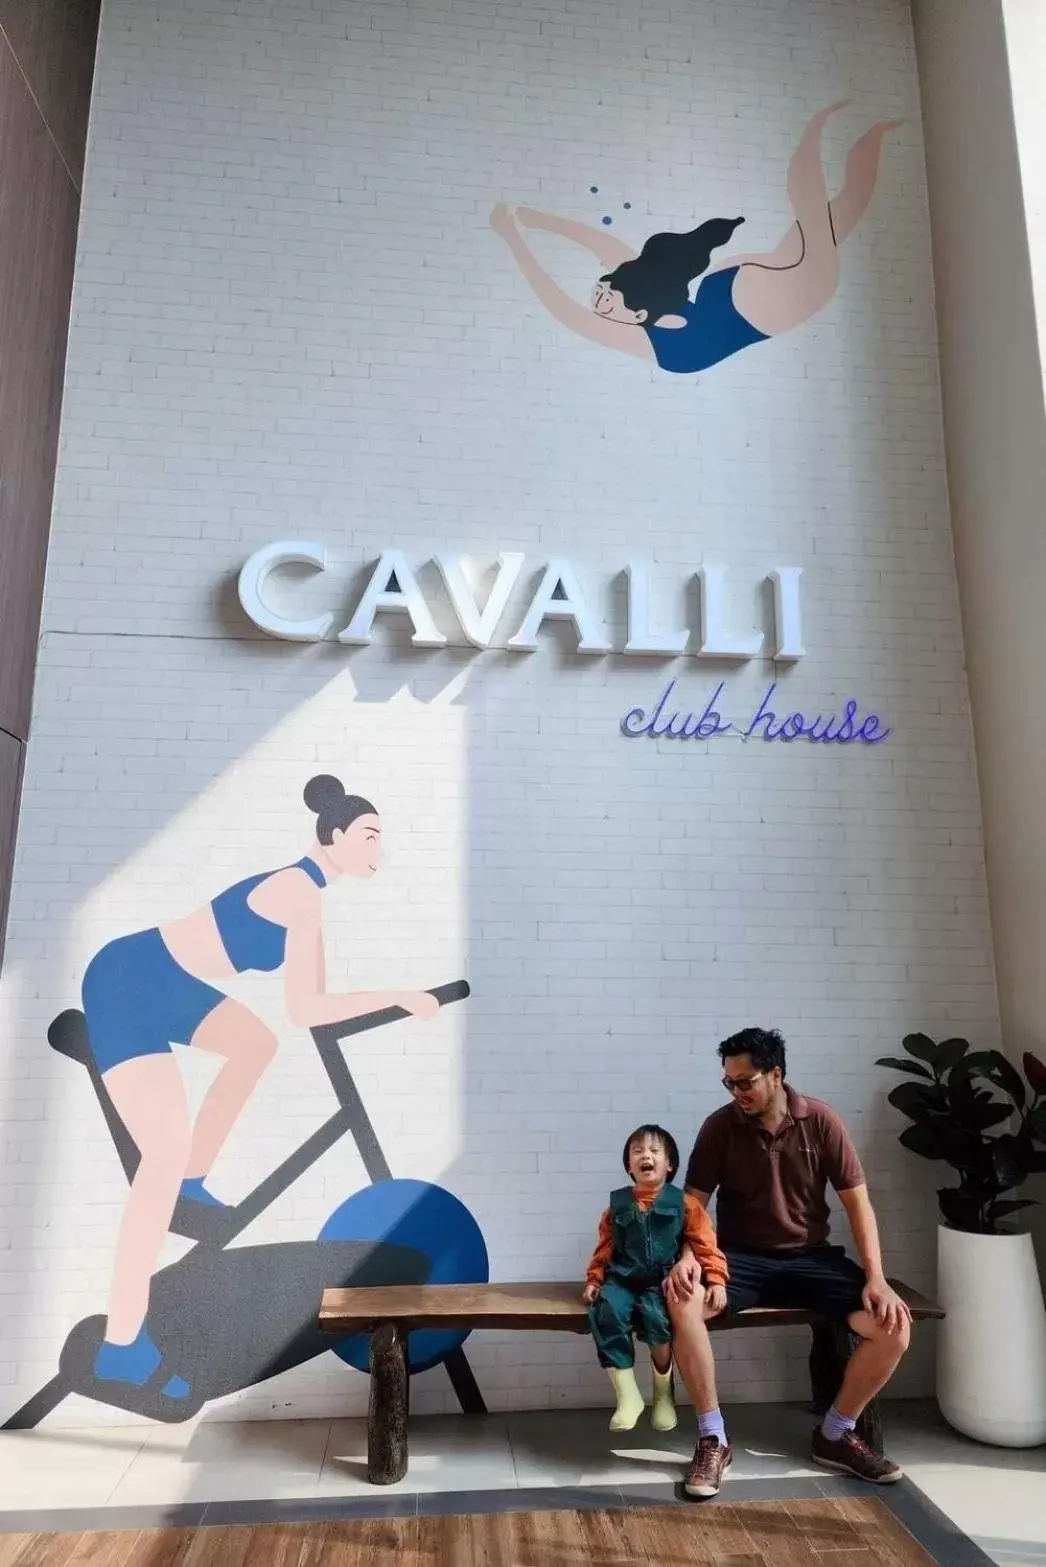 Property logo or sign in The Cavalli Casa Resort